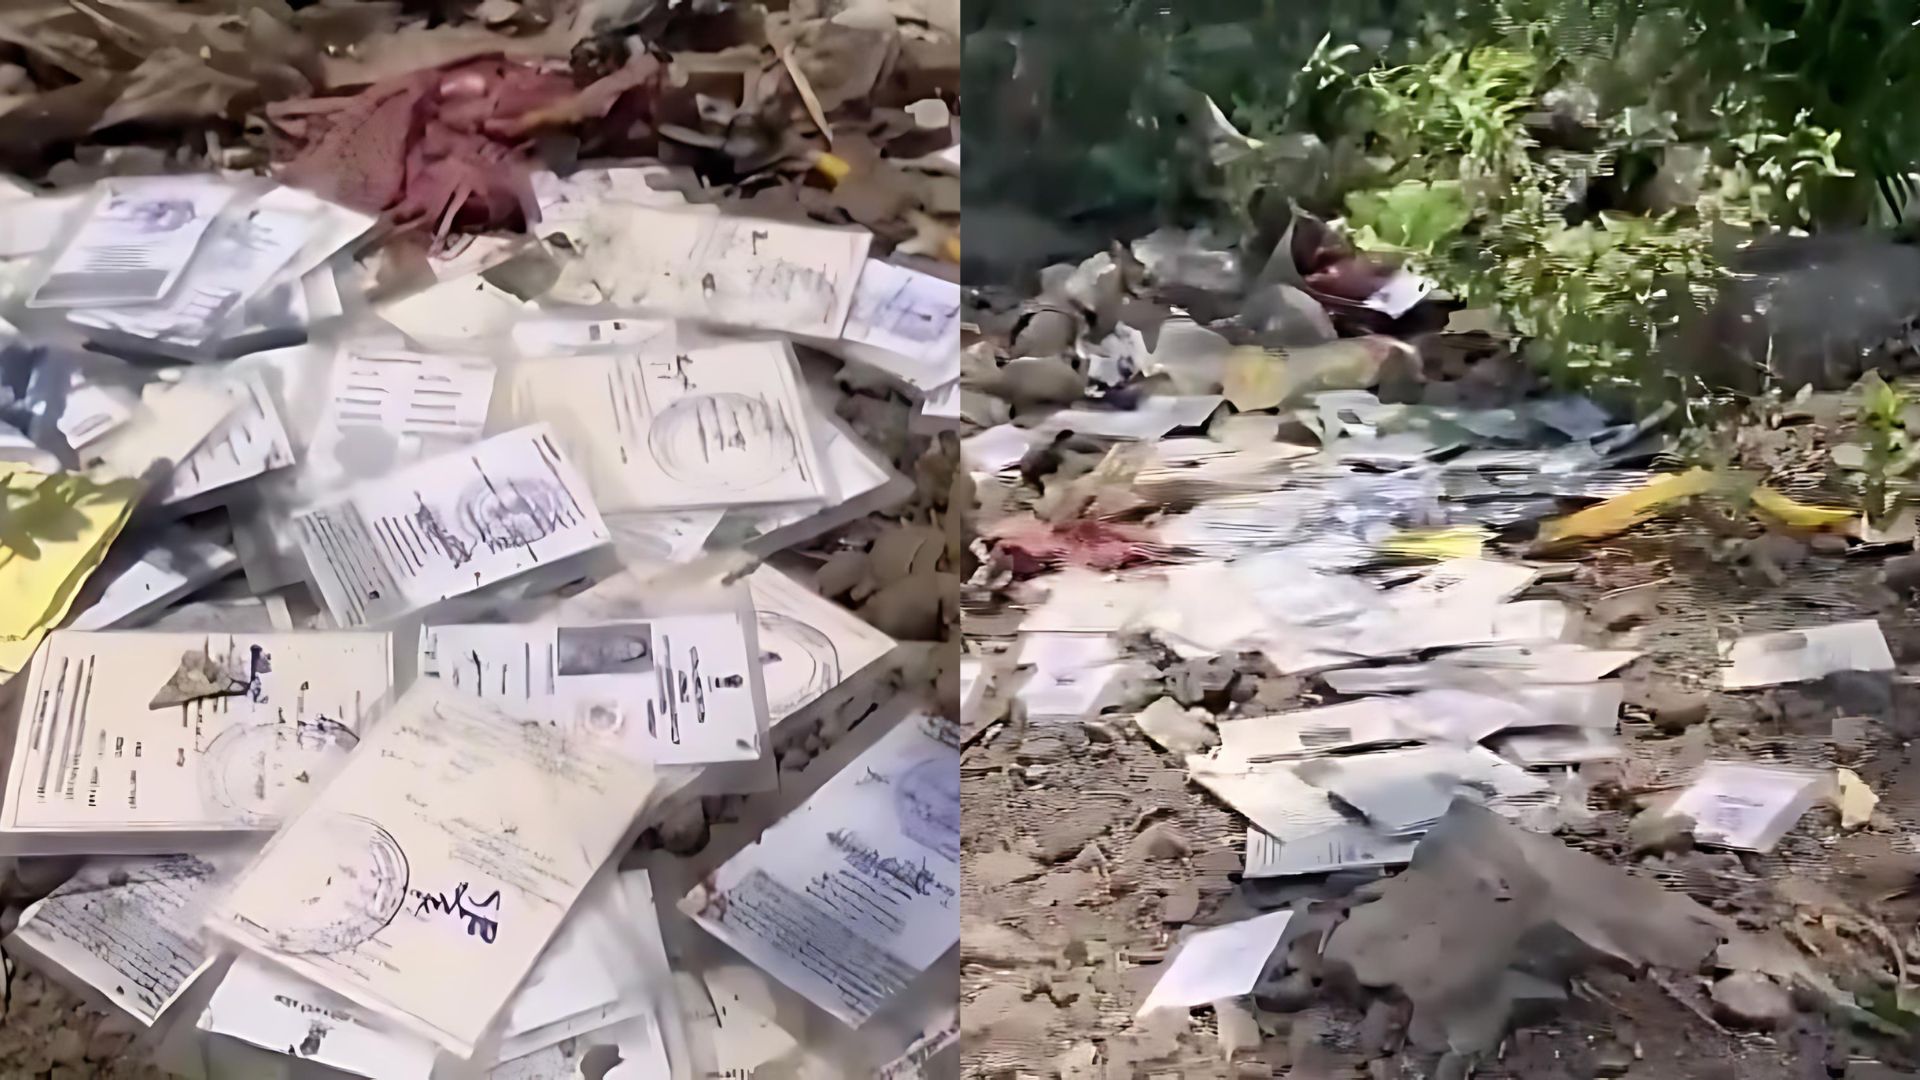 Maharashtra: Voter ID cards were discovered in the garbage in Jalna; Investigation Underway